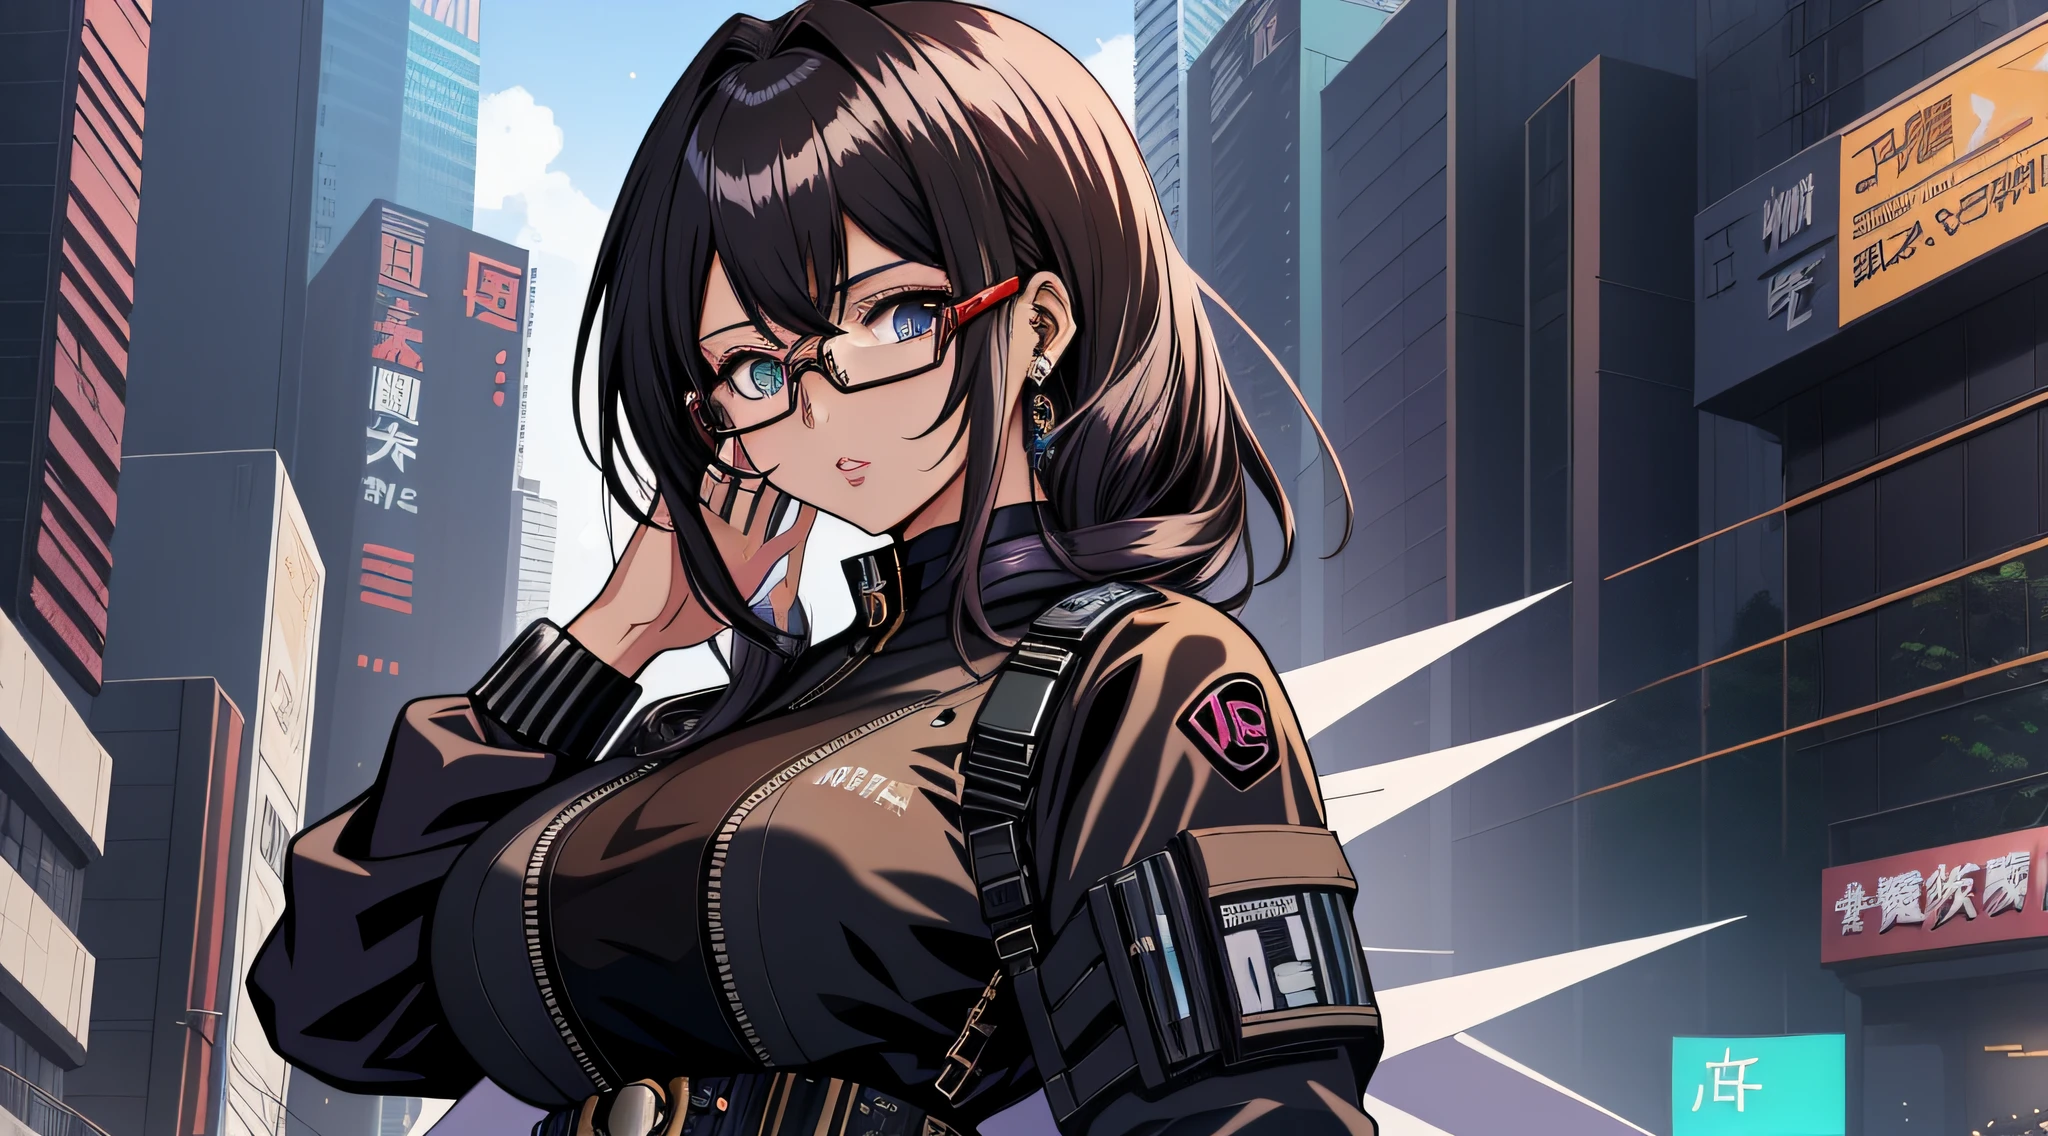 Anime - imagem de estilo 1mulher com olhos azuis e Bblack hair, Bblack hair, thick eyebrow, face of a 27 year old woman, 27 year old young man, cloused mouth, fully body, cyberpunk anime art, (cloused mouth: 1.5), (double eyelid), (Bblack hair: 1.3) wearing dress, digital cyberpunk anime art, cyberpunk anime art, range murata and artgerm, eyeglass, futuristic clothing, (whole body: 1.5), wearing dress, stylish pants, Technological dress, transparent spectacle lenses, 极其详细的Artgerm, modern cyberpunk anime, artgerm and atey ghailan, artgerm and genzoman, cloused mouth